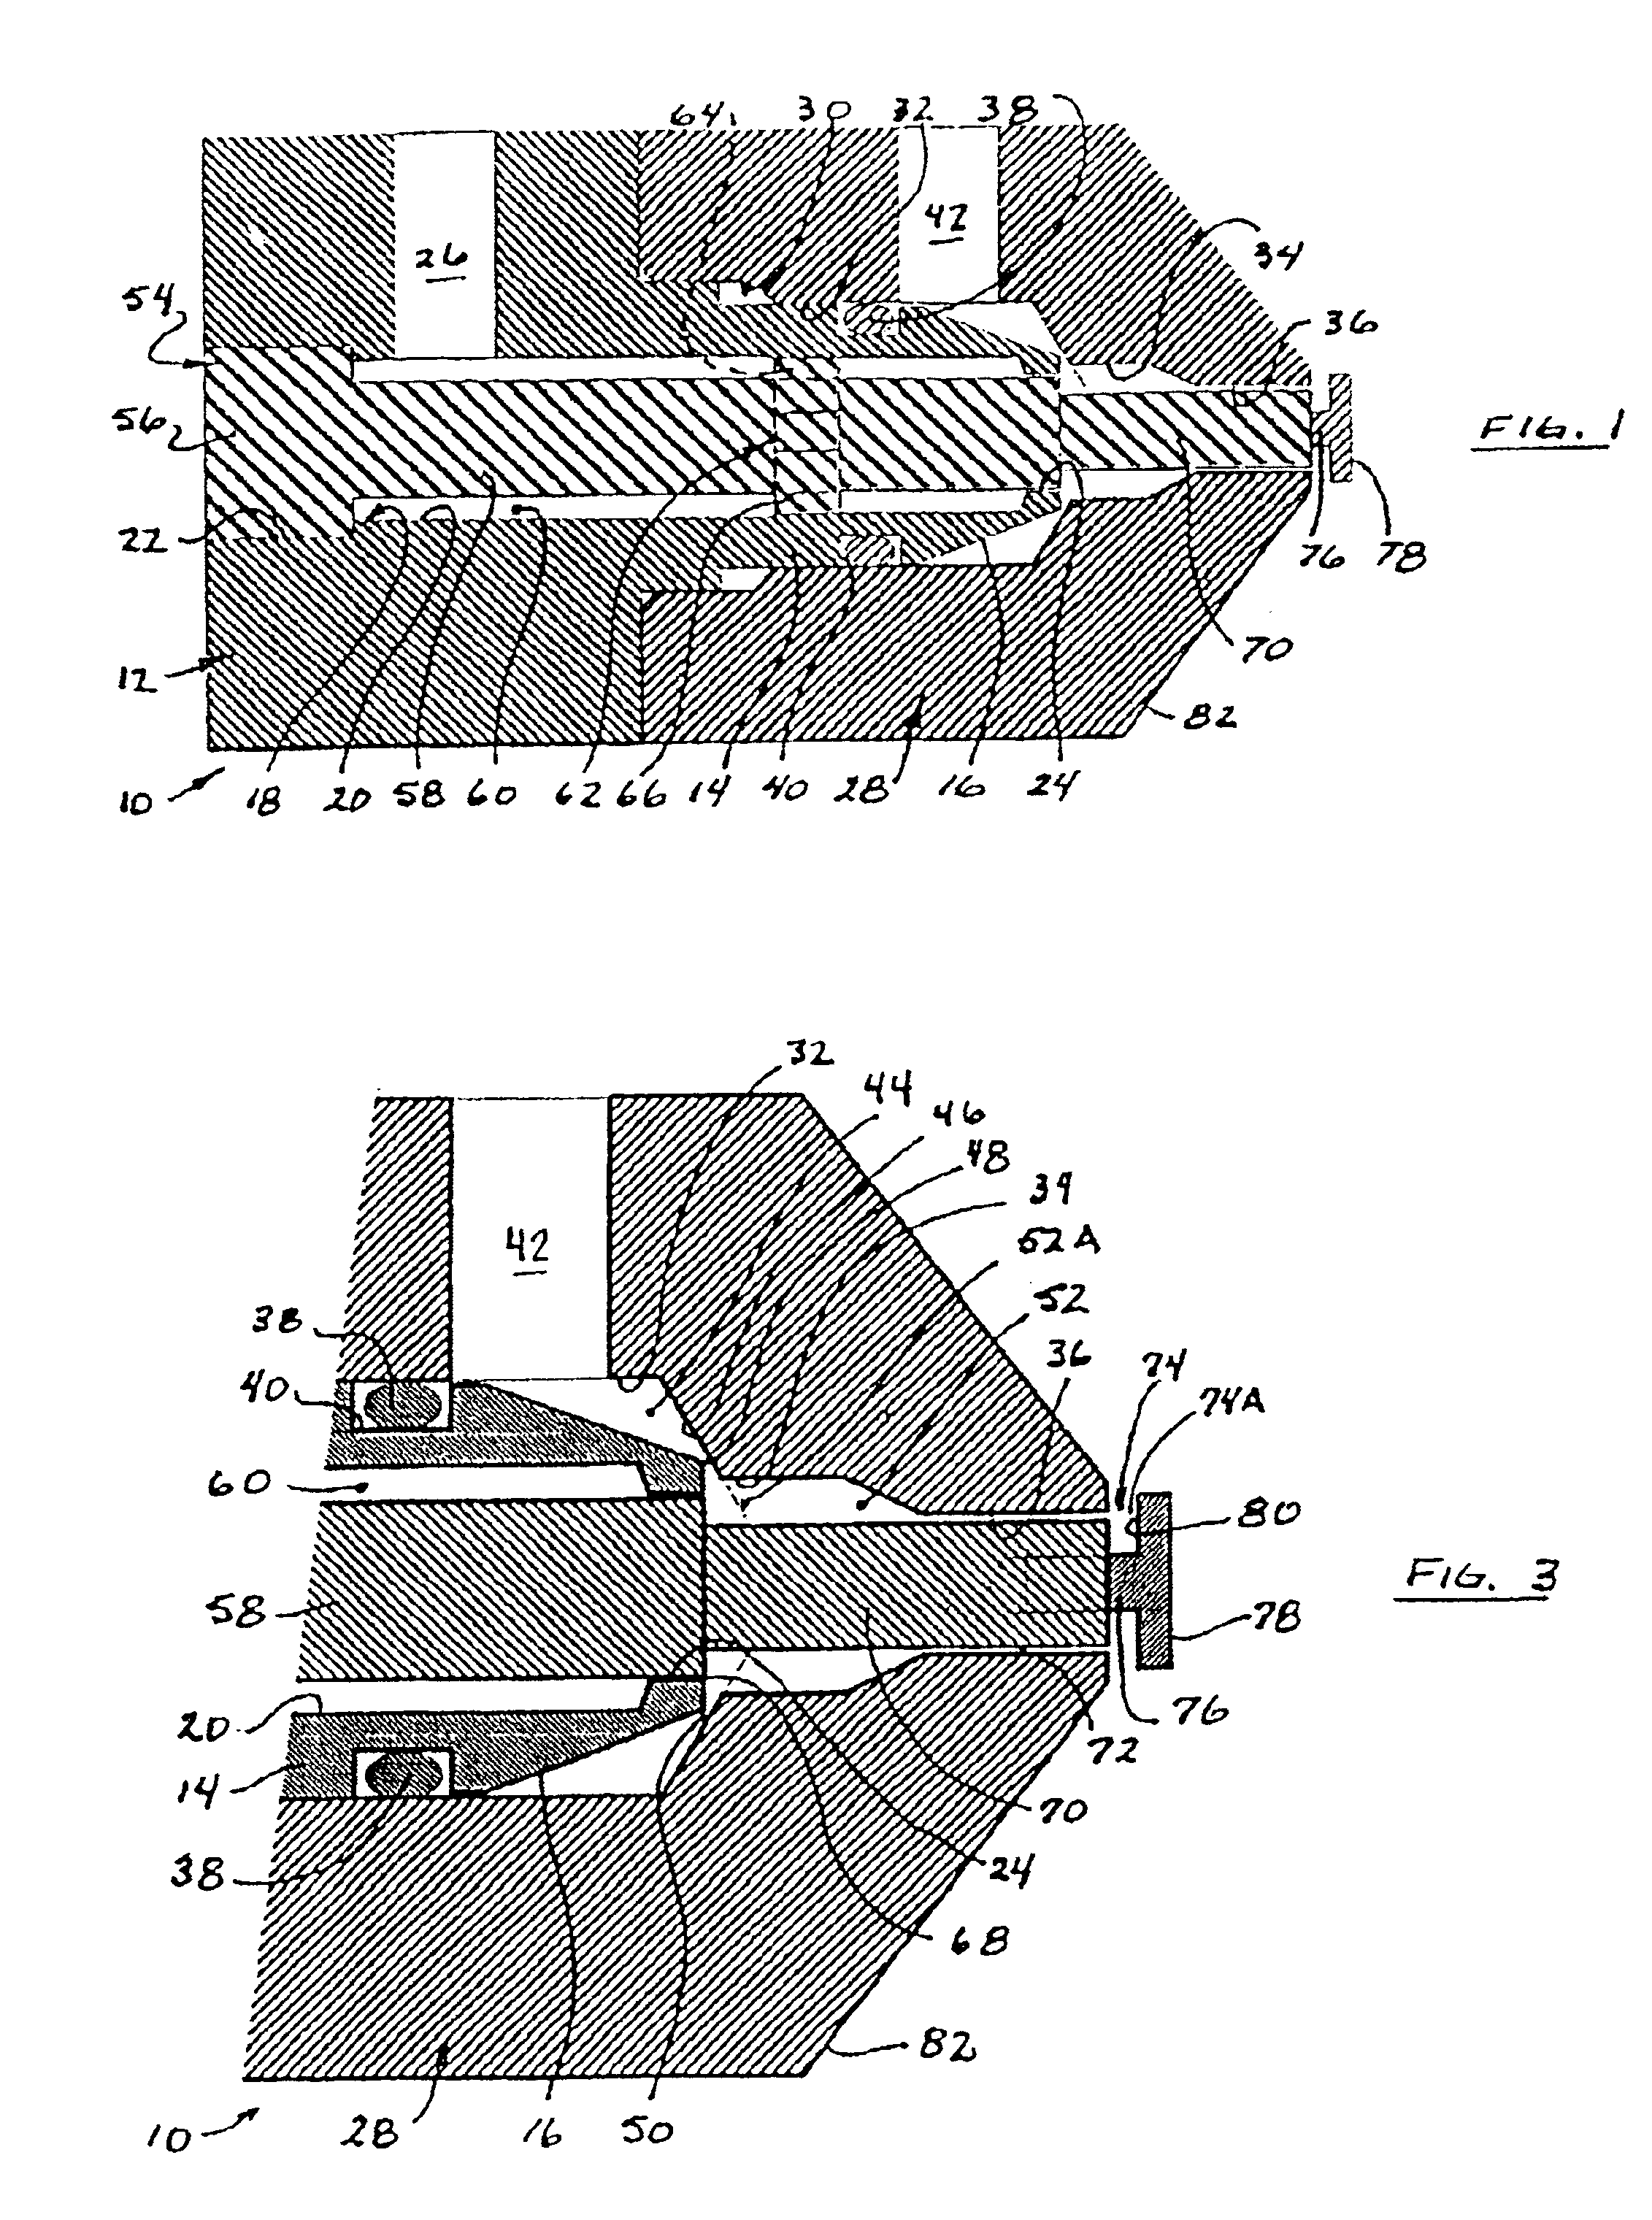 Atomizing nozzle for fine spray and misting applications